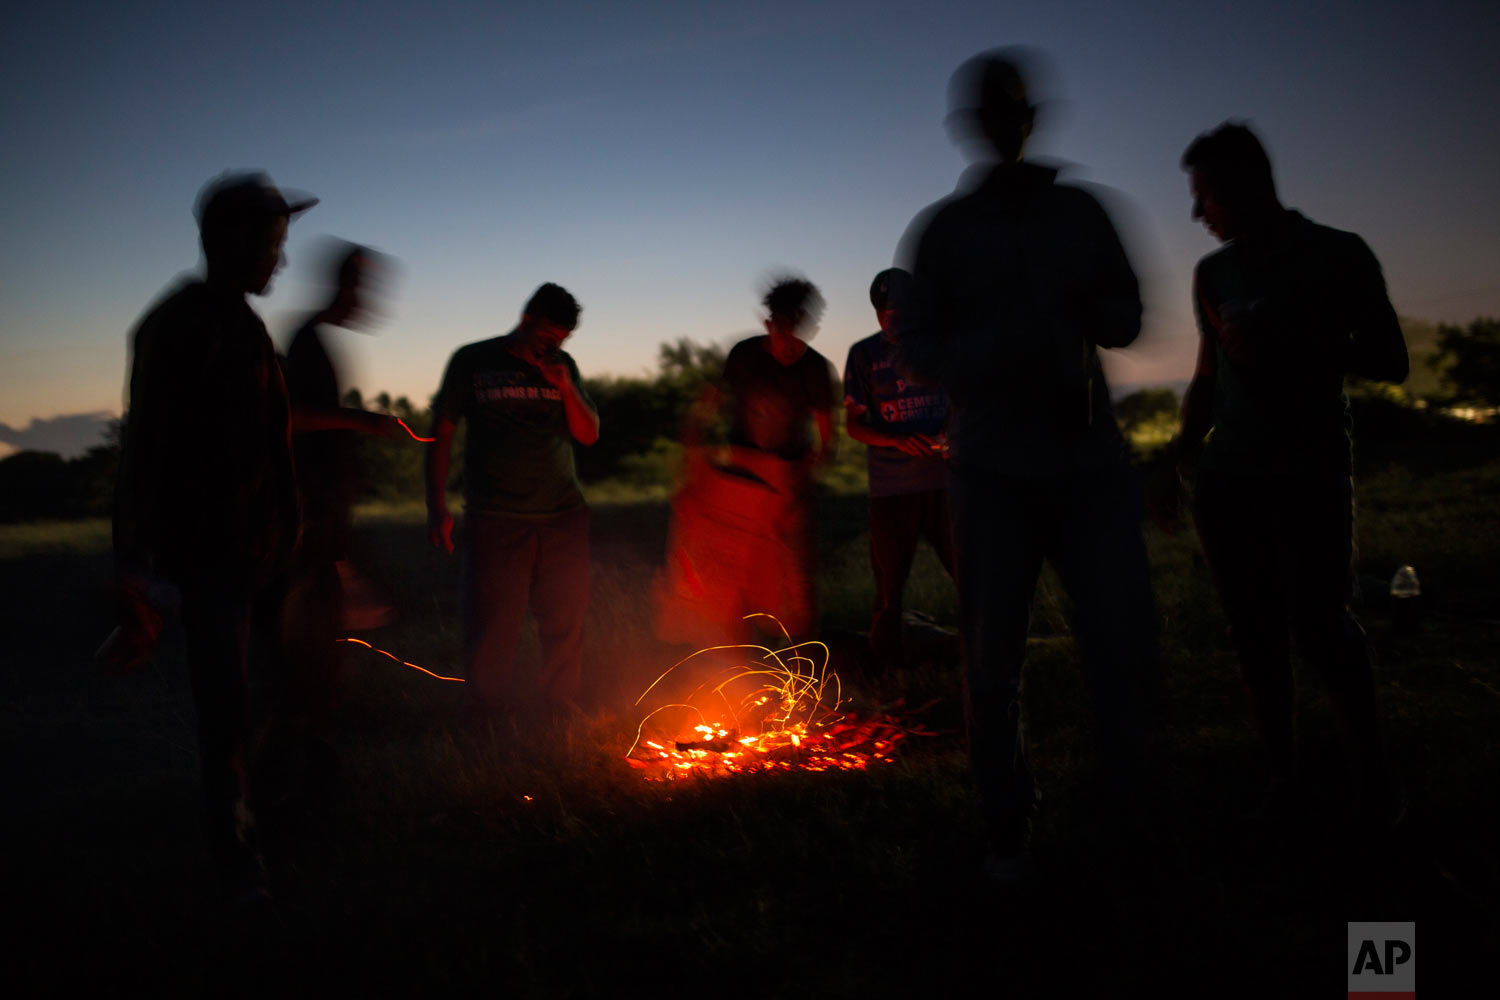  Central American migrants gather around a fire at a camp set up by a caravan of thousands of migrants, in Juchitan, Mexico, after sunset Tuesday, Oct. 30, 2018. This caravan of about 4,000 mainly Honduran migrants set up camp Tuesday in the Oaxaca s